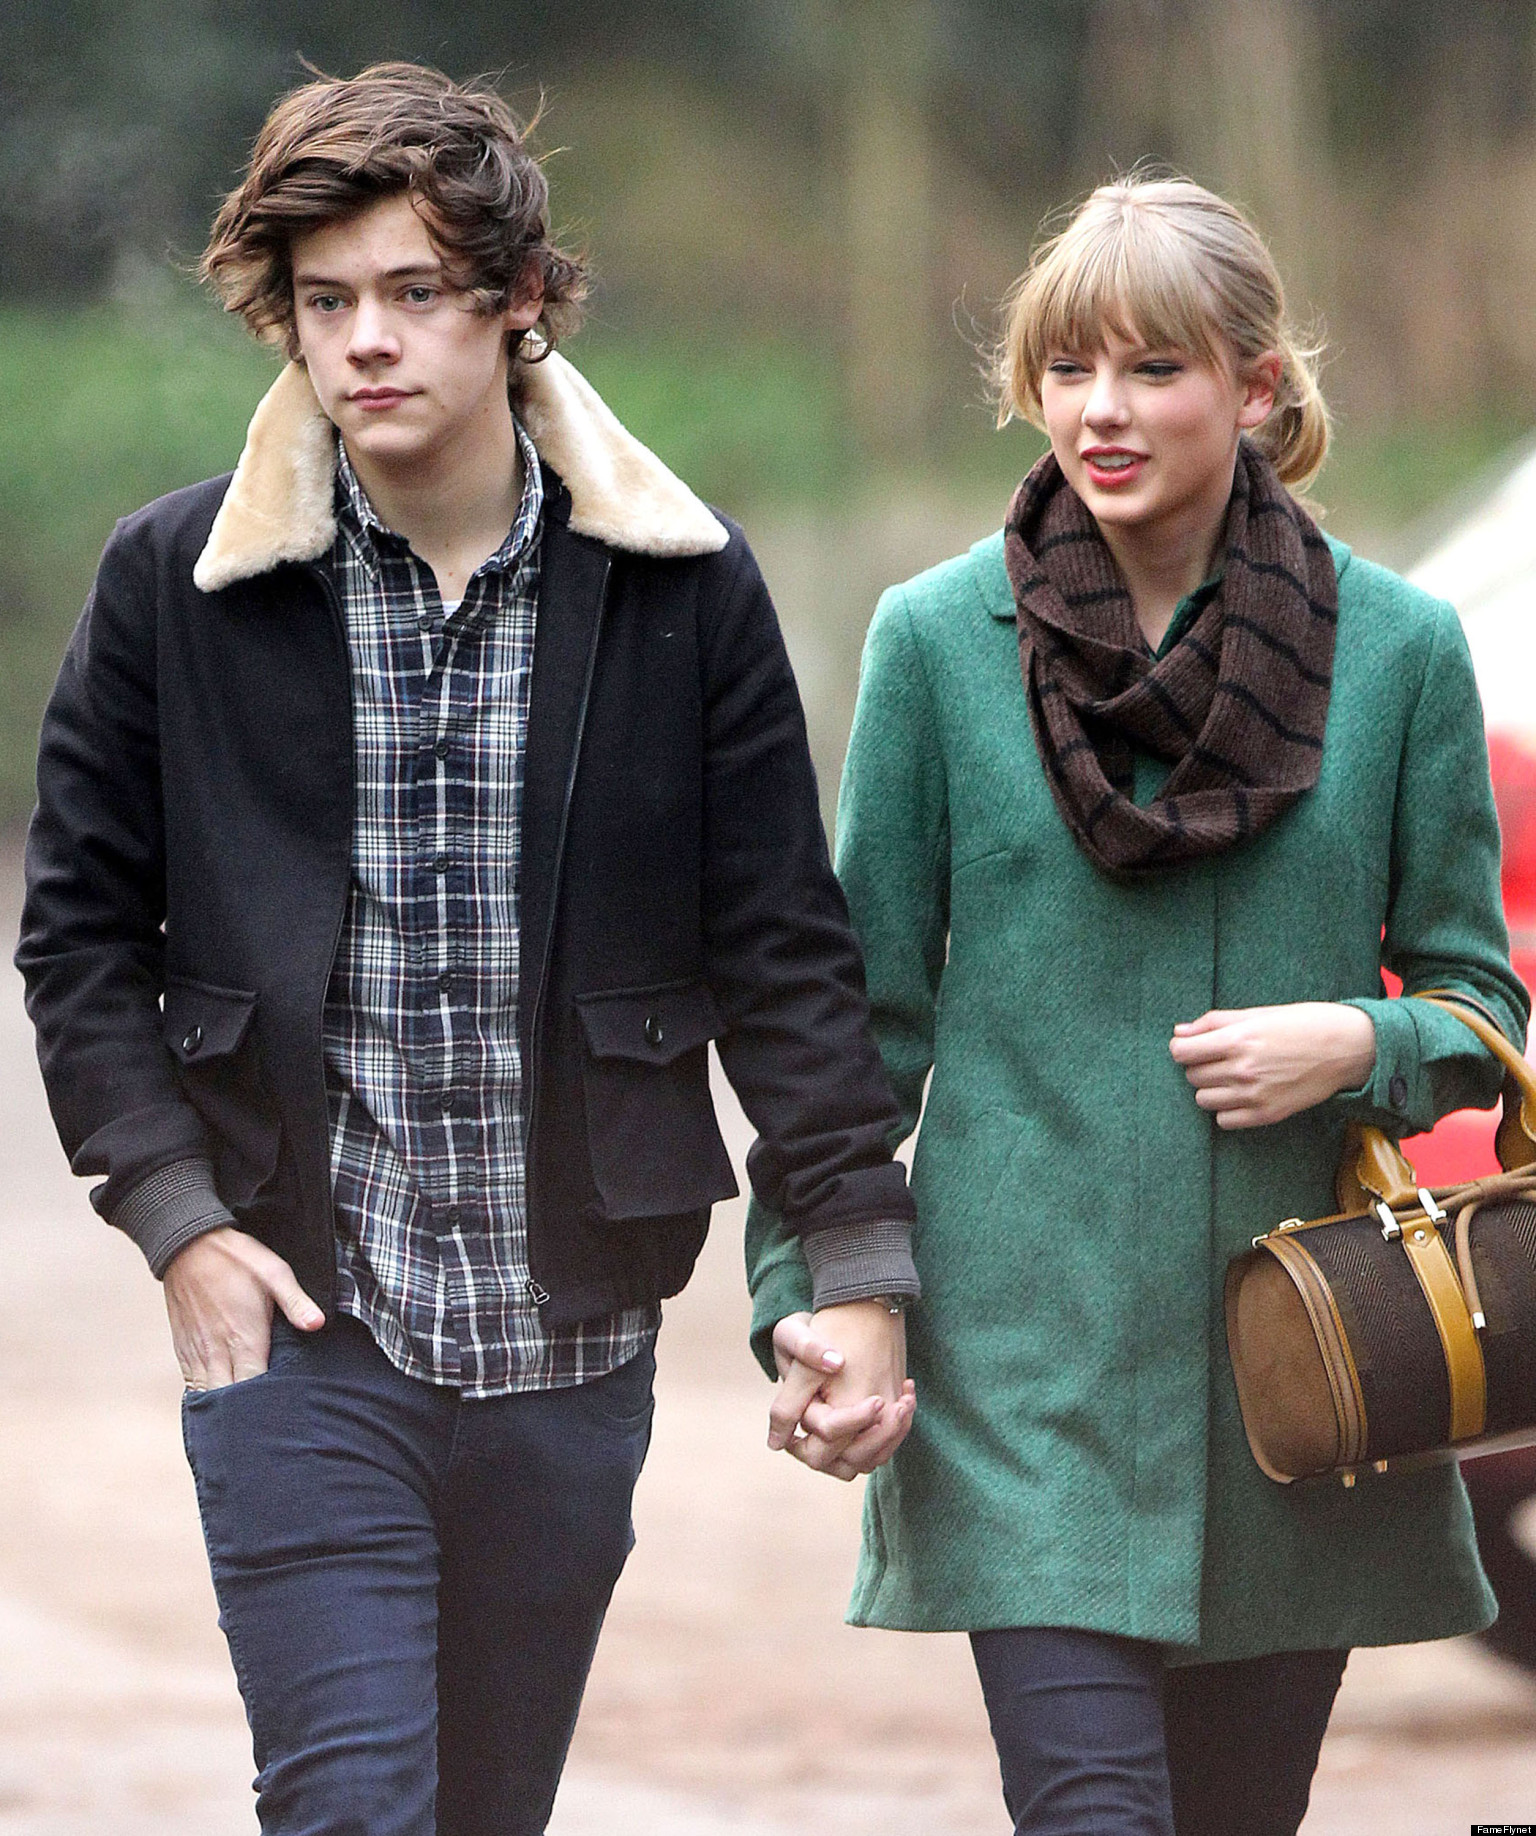 Taylor Swift and Harry Styles dated for a short period in 2013 ready for it